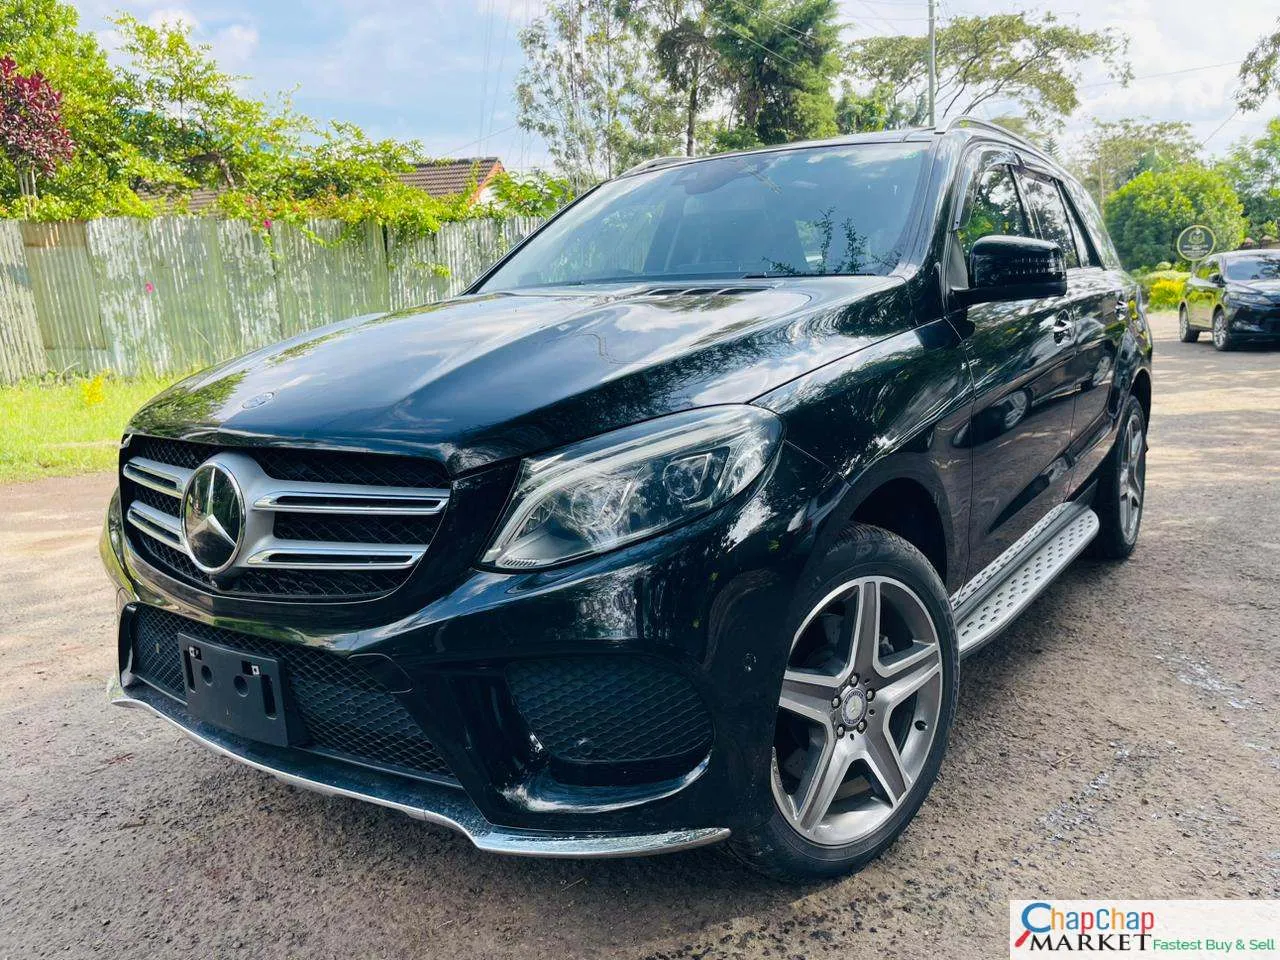 Mercedes Benz GLE QUICK SALE 🔥 You Pay 30% DEPOSIT Mercedes GLE for sale in kenya hire purchase installments GLE kenya Trade in OK EXCLUSIVE